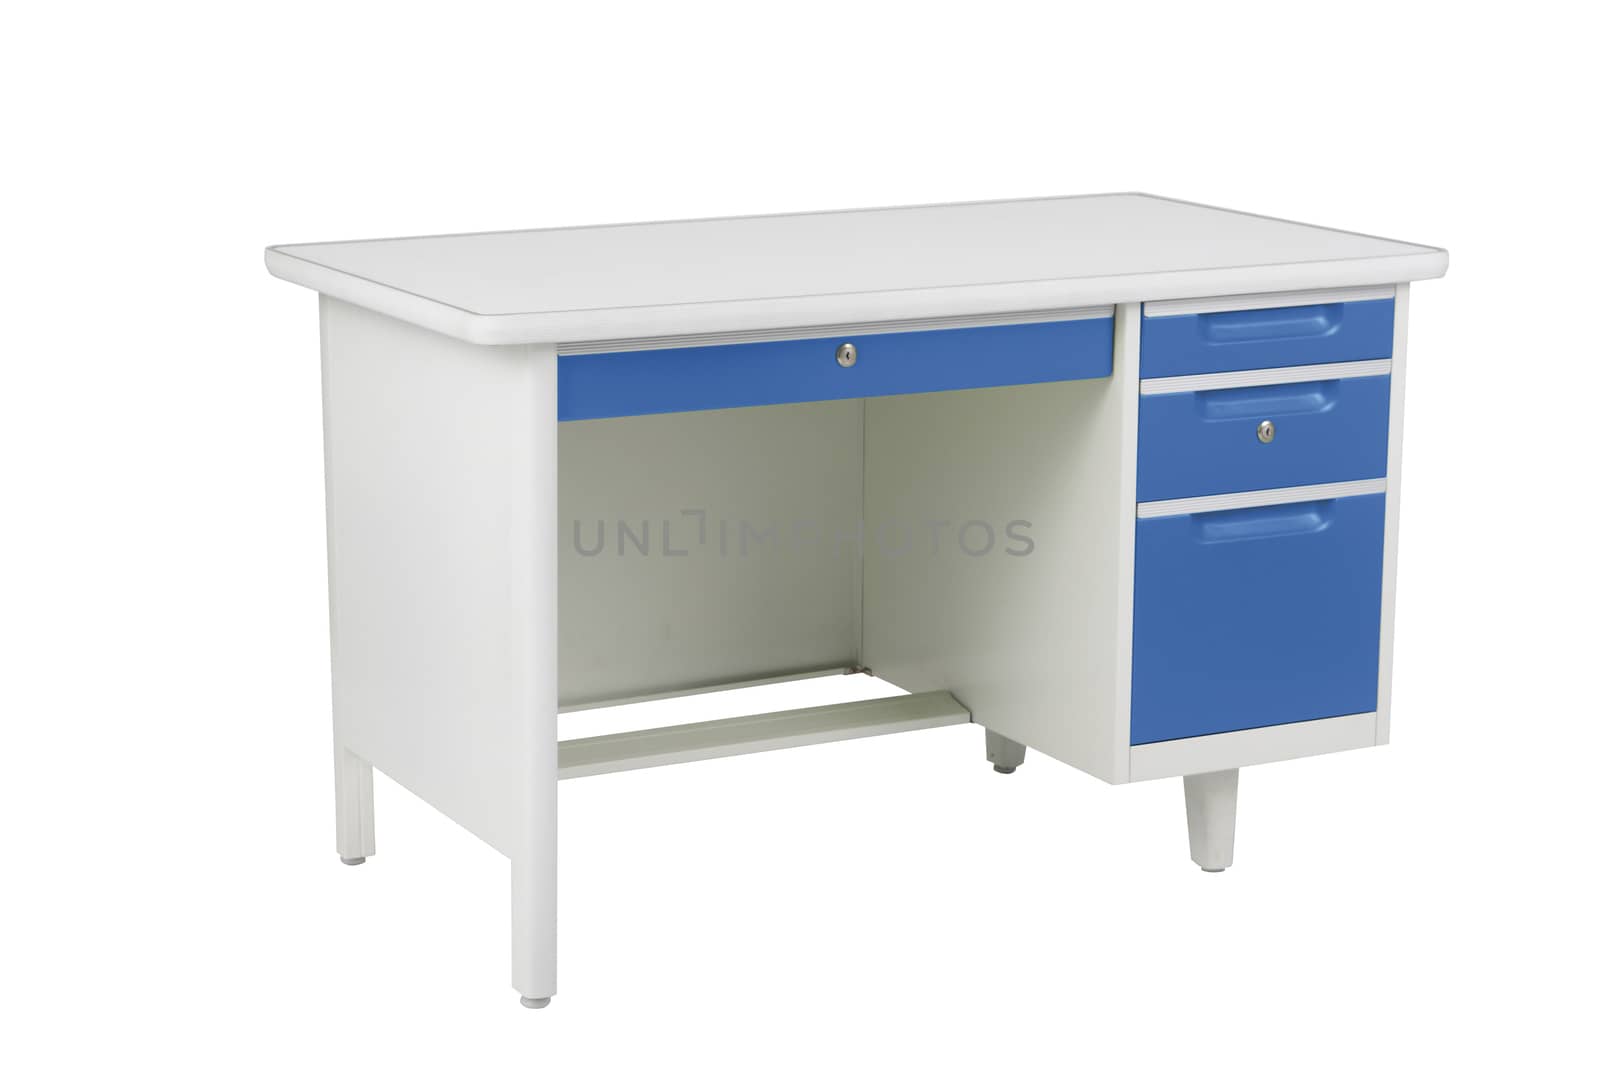 Blue and white steel office table with drawers furniture isolated on white background.